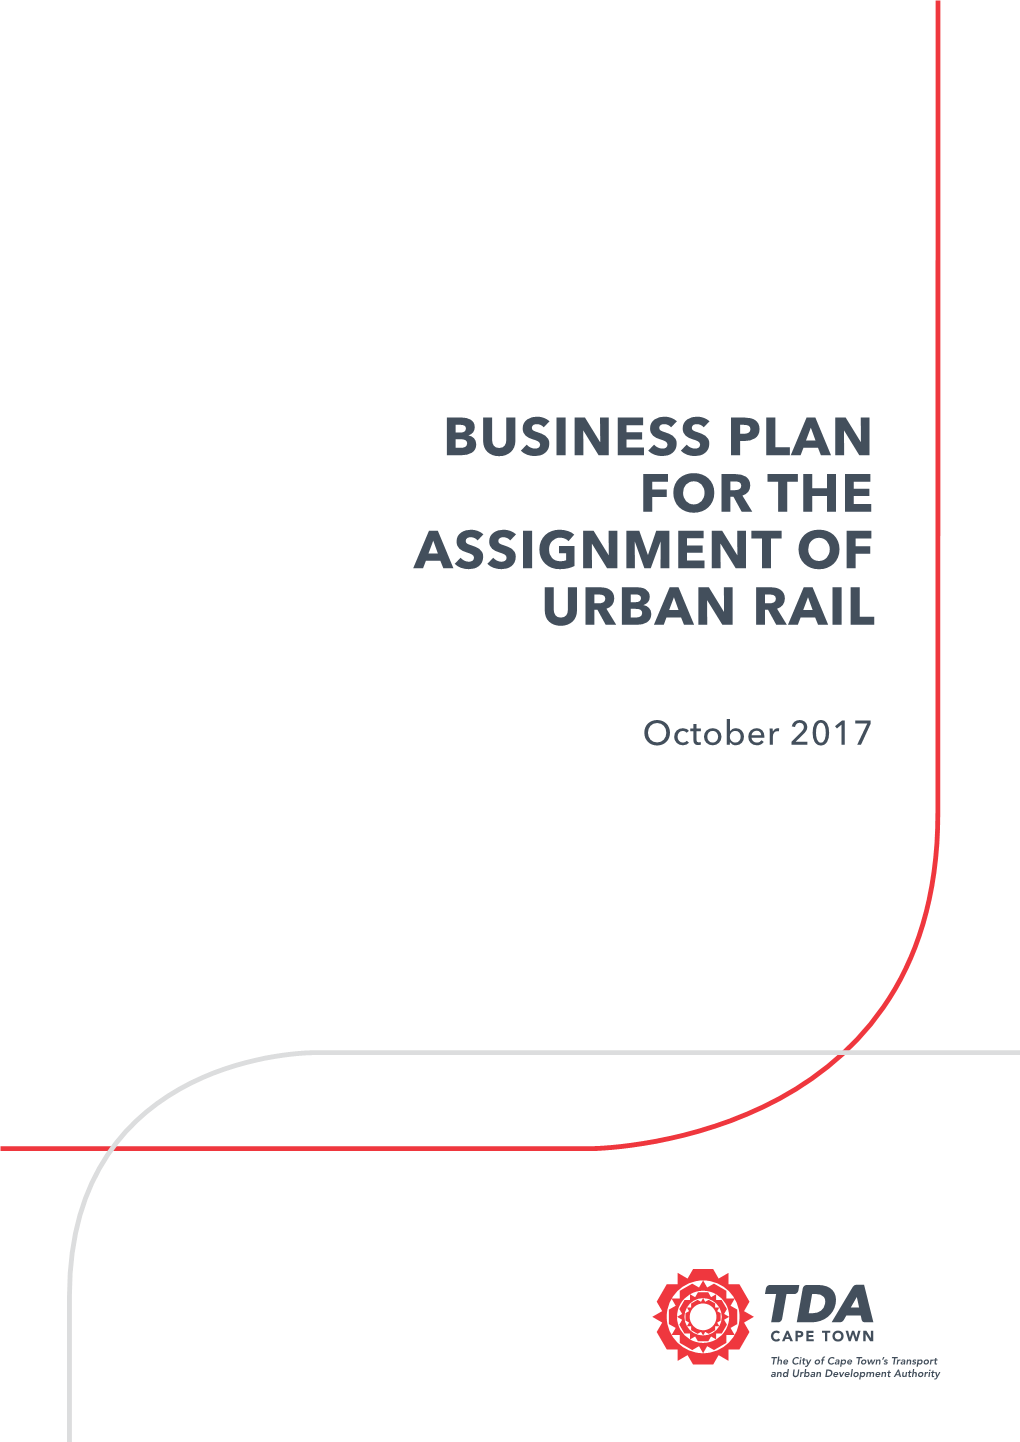 Business Plan for the Assignment of Urban Rail